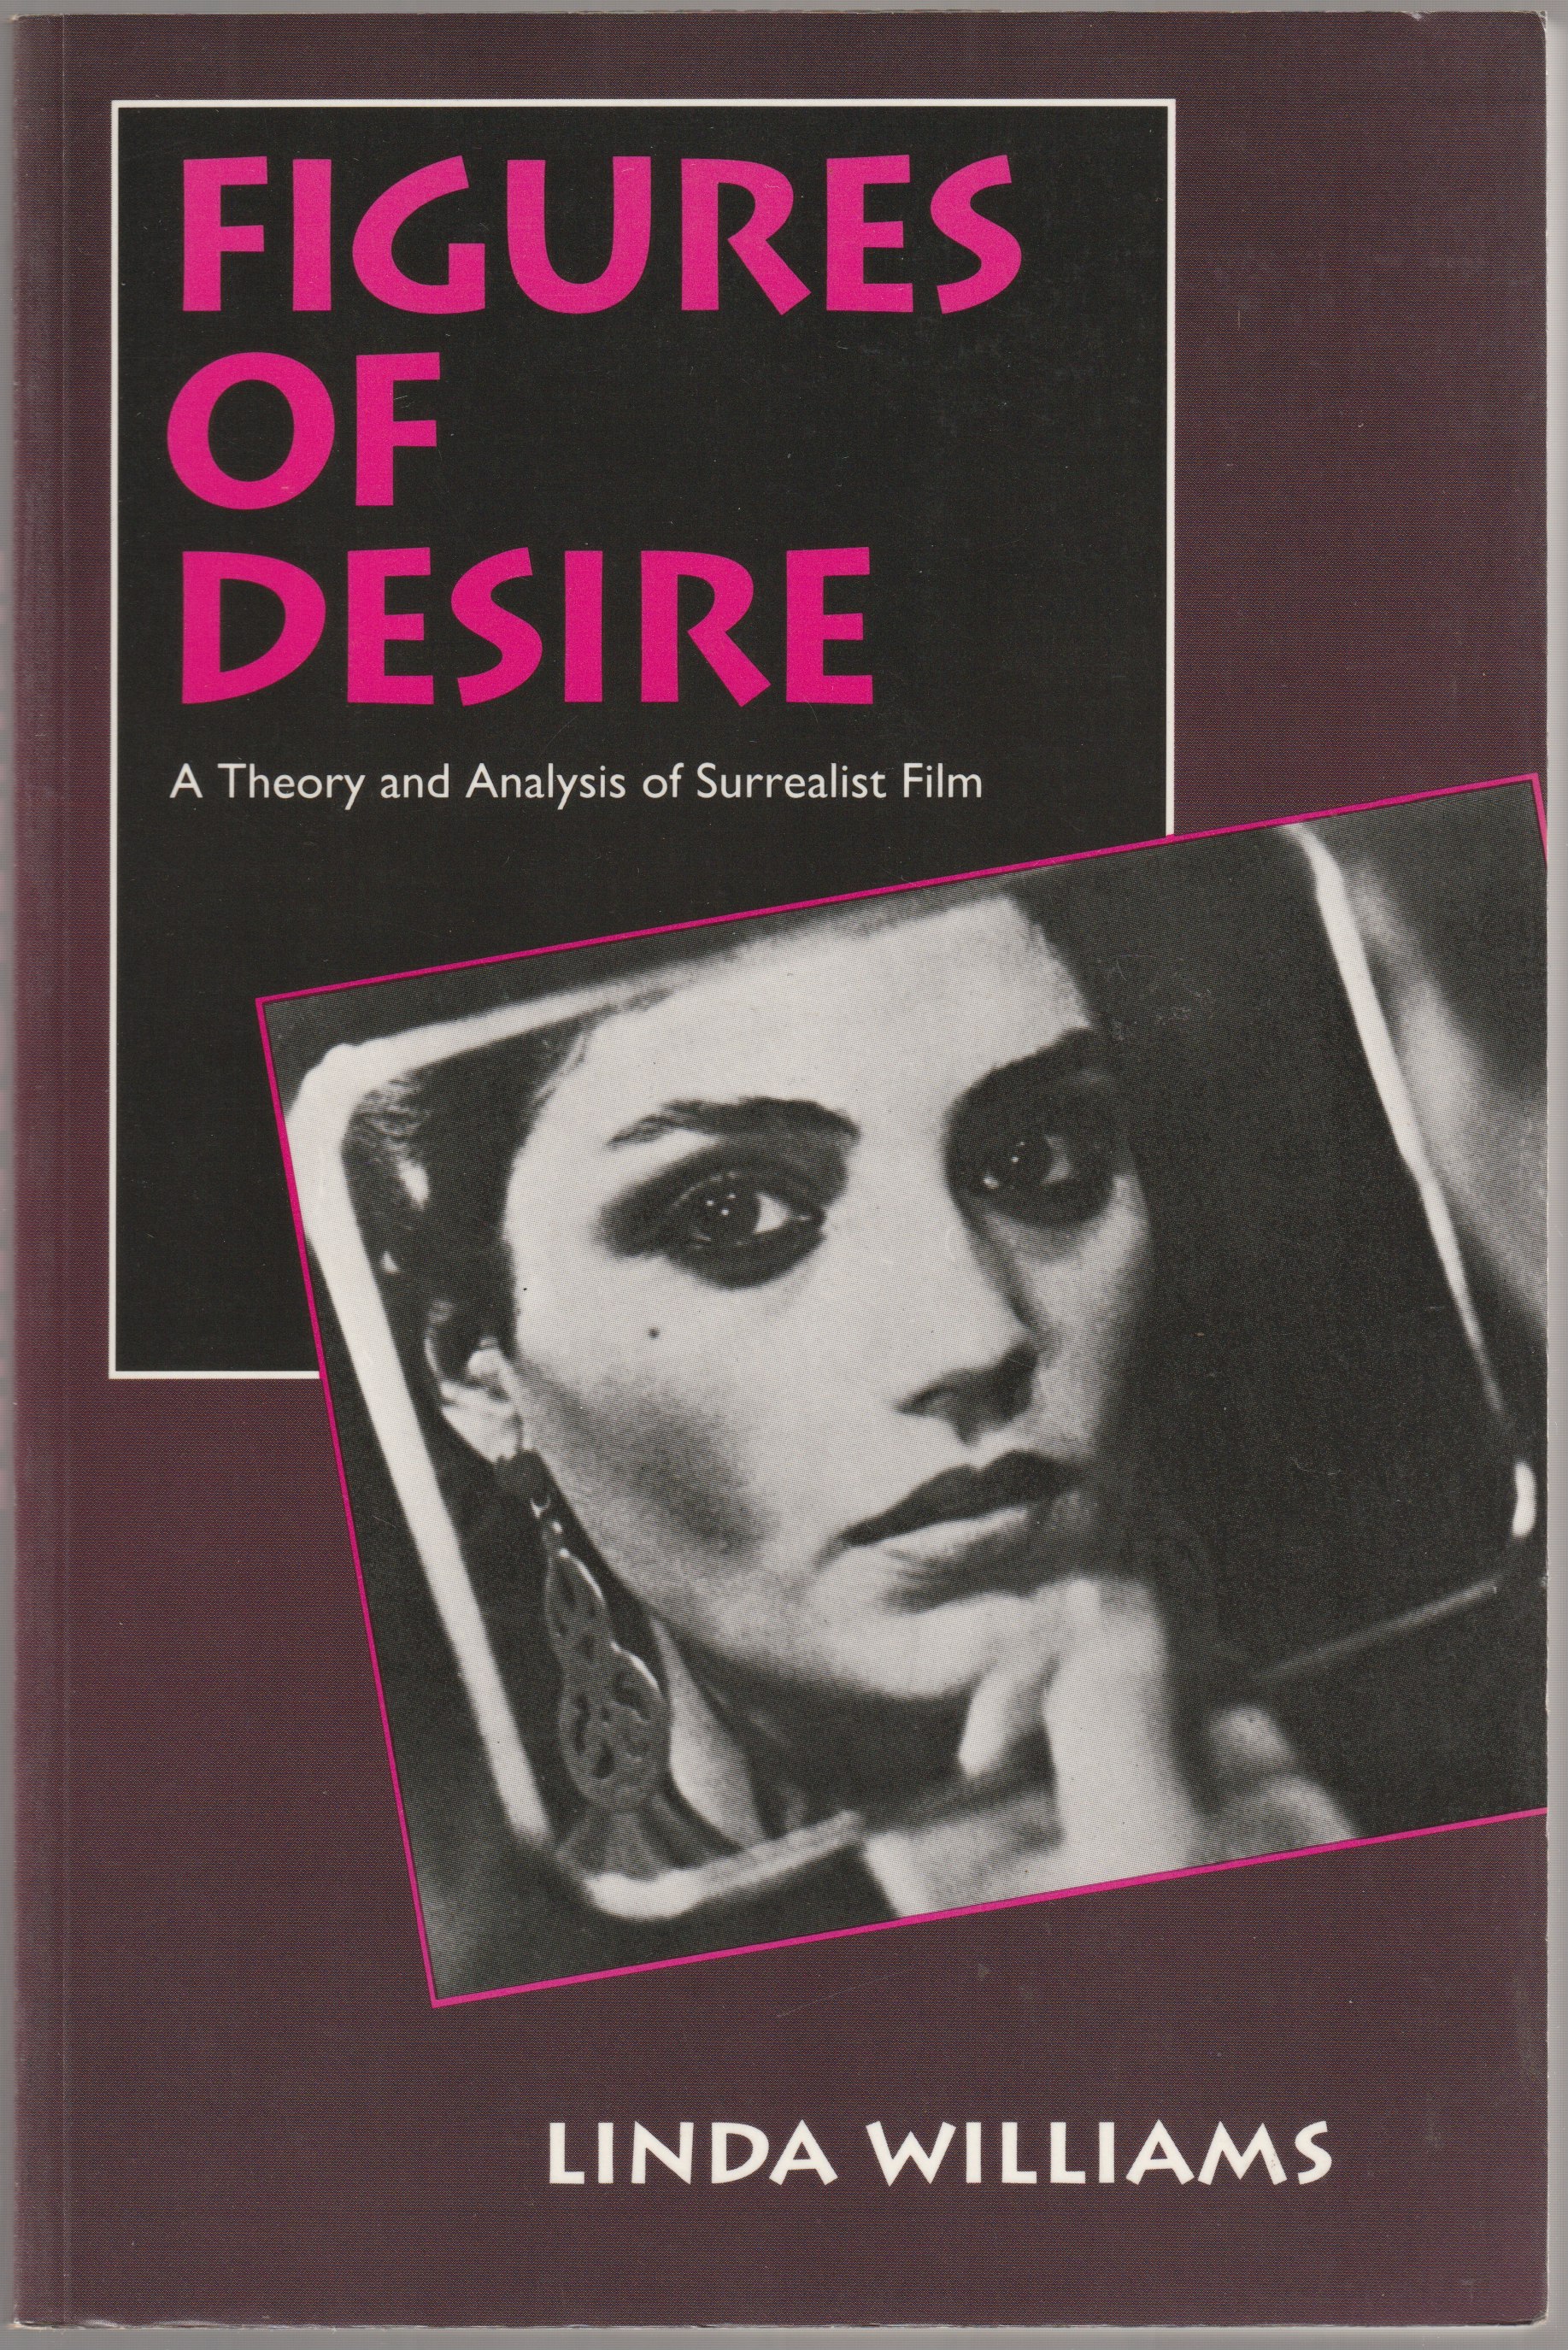 Figures of desire : a theory and analysis of surrealist film.